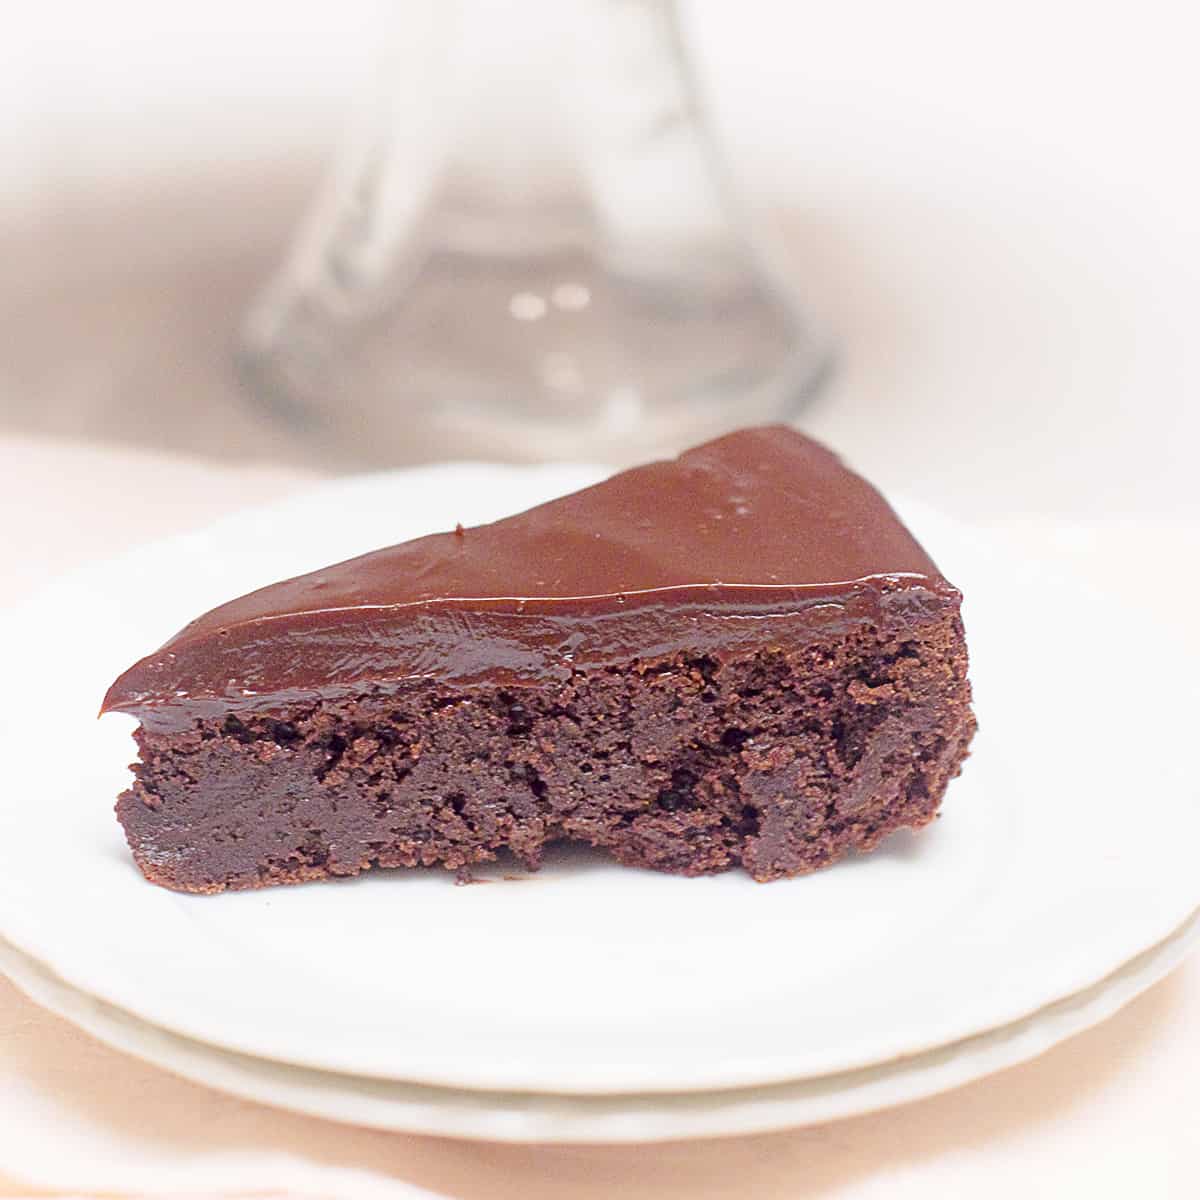 A serving of flourless chocolate cake on a white plate with remainder of cake on a cake stand in background.